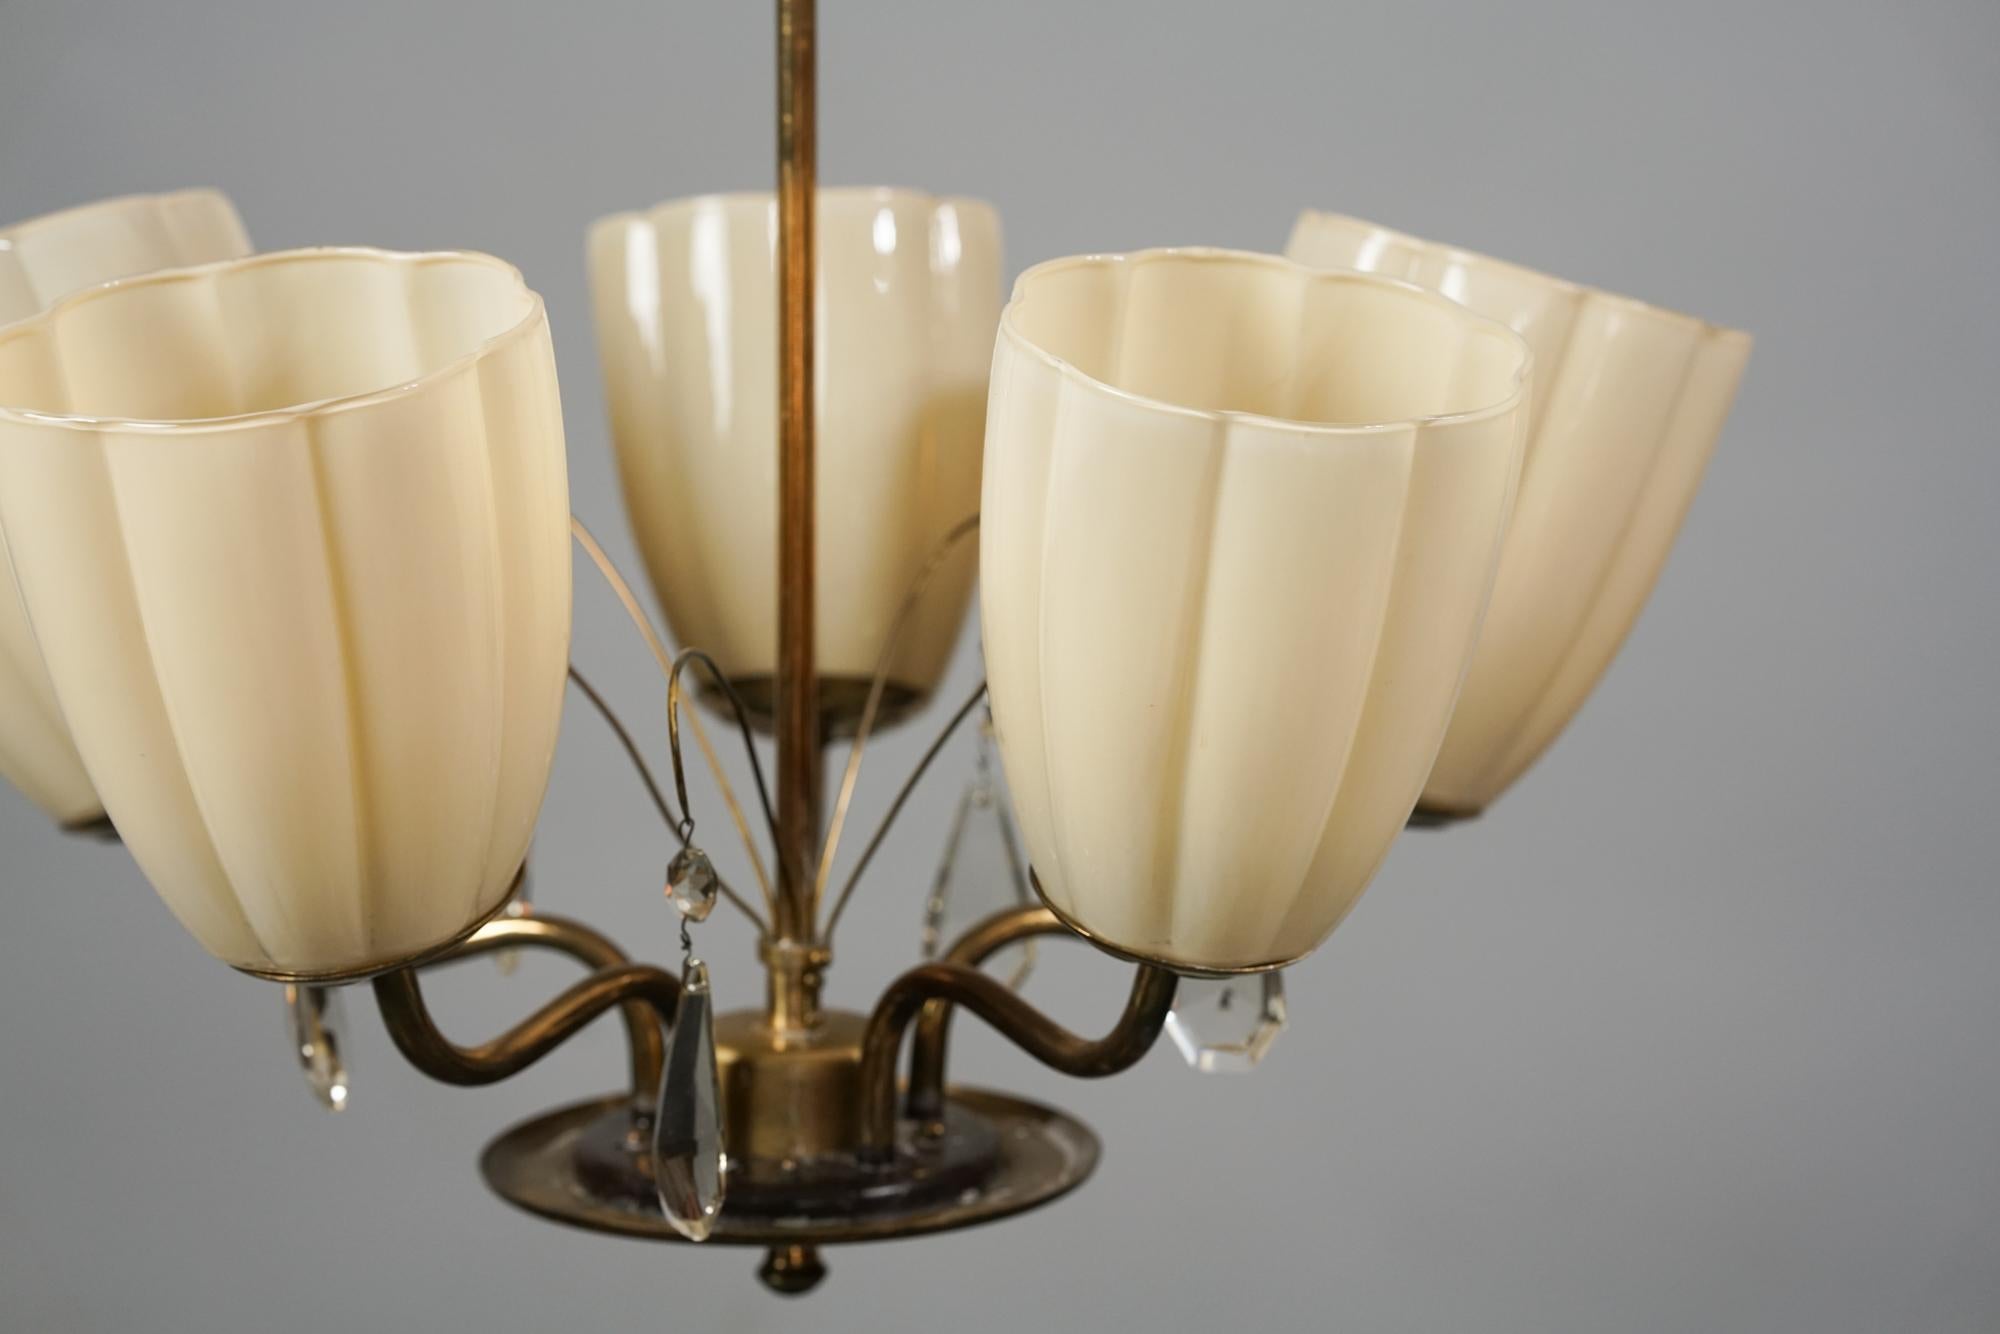 Finnish chandelier by unknown designer from the 1950s. Opaline glass, brass frame, crystal details. Beautiful classic Scandinavian Modern design reminiscences of Taito oy and Orno chandeliers. The chandelier is in good vintage condition, minor wear